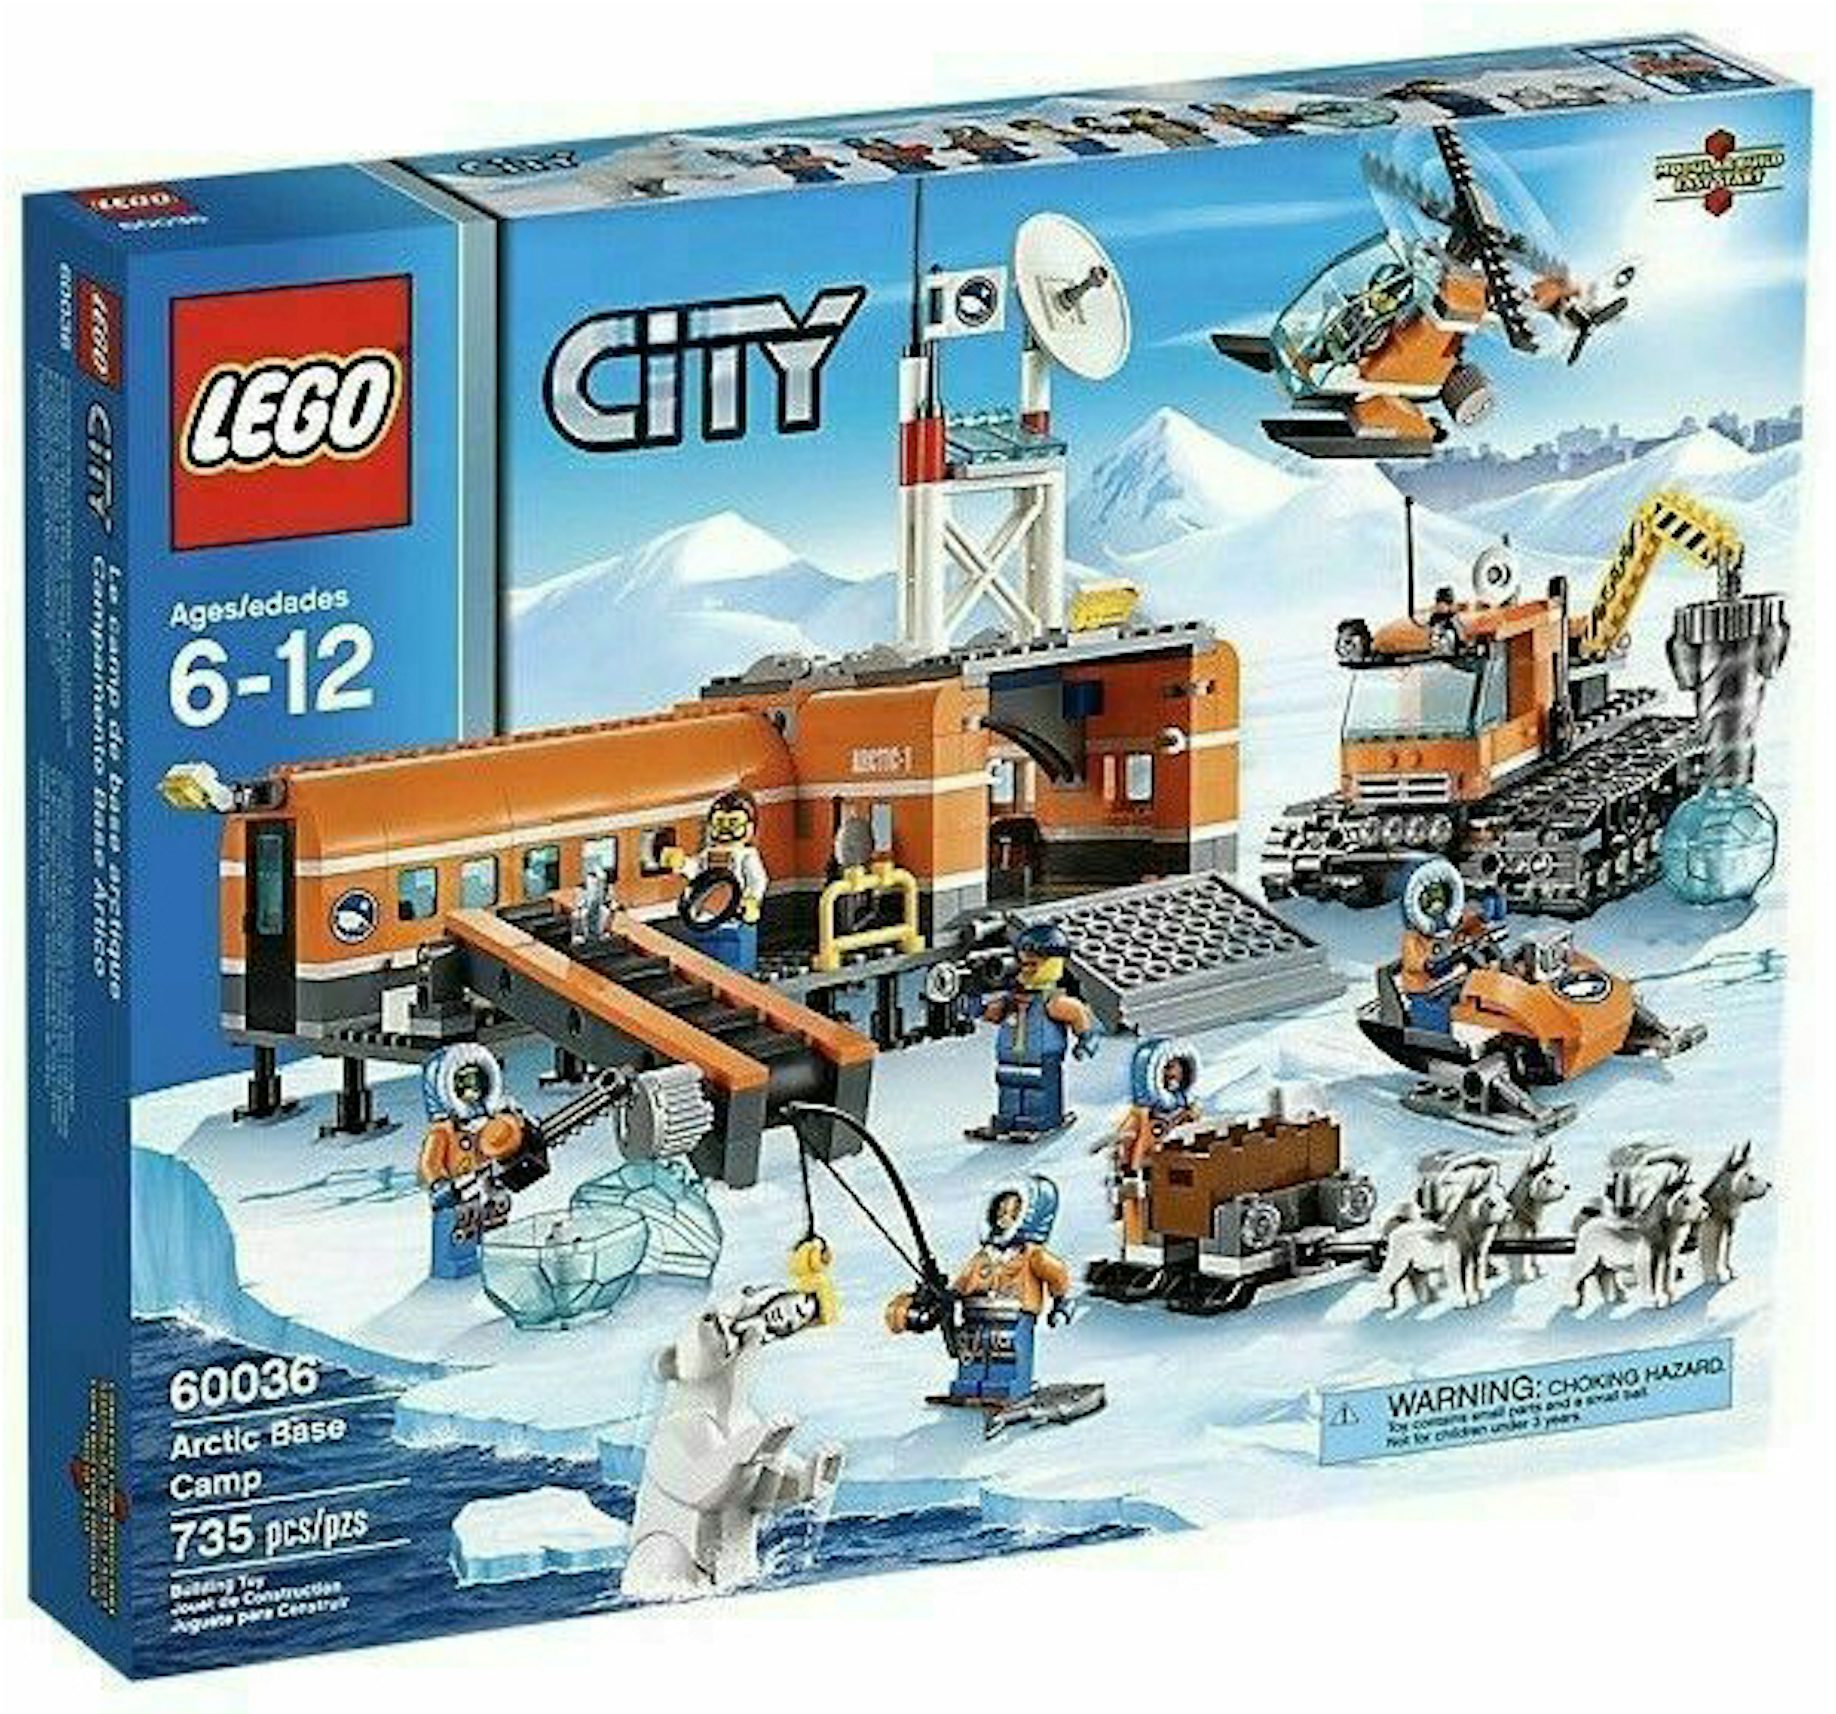 Lego Town City #60036 Adult Owned Arctic Base Camp Set: 100% Complete